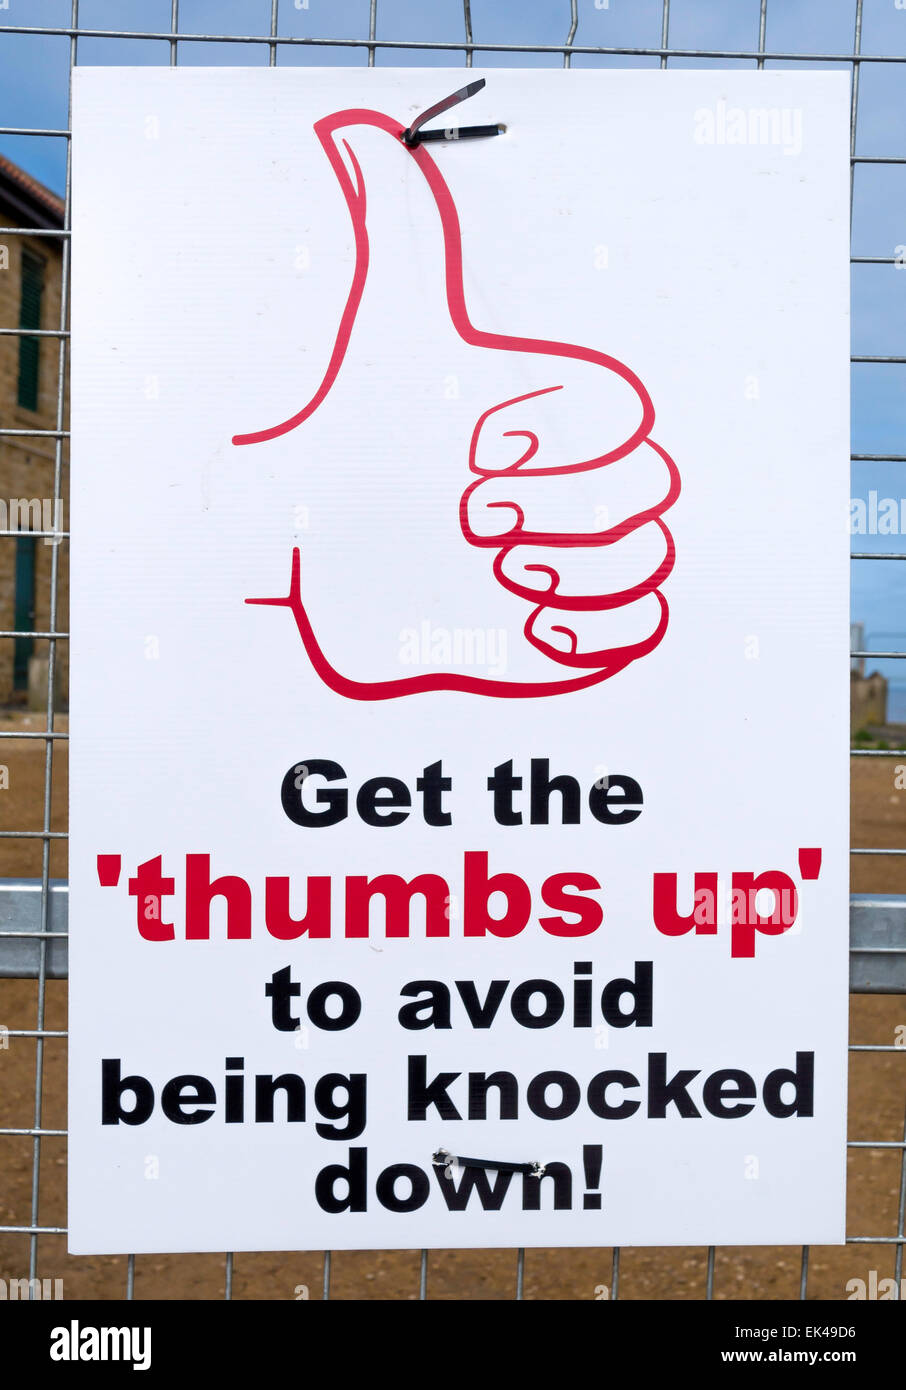 Construction site safety notice Get the ‘thumbs up’ to avoid being knocked down Stock Photo